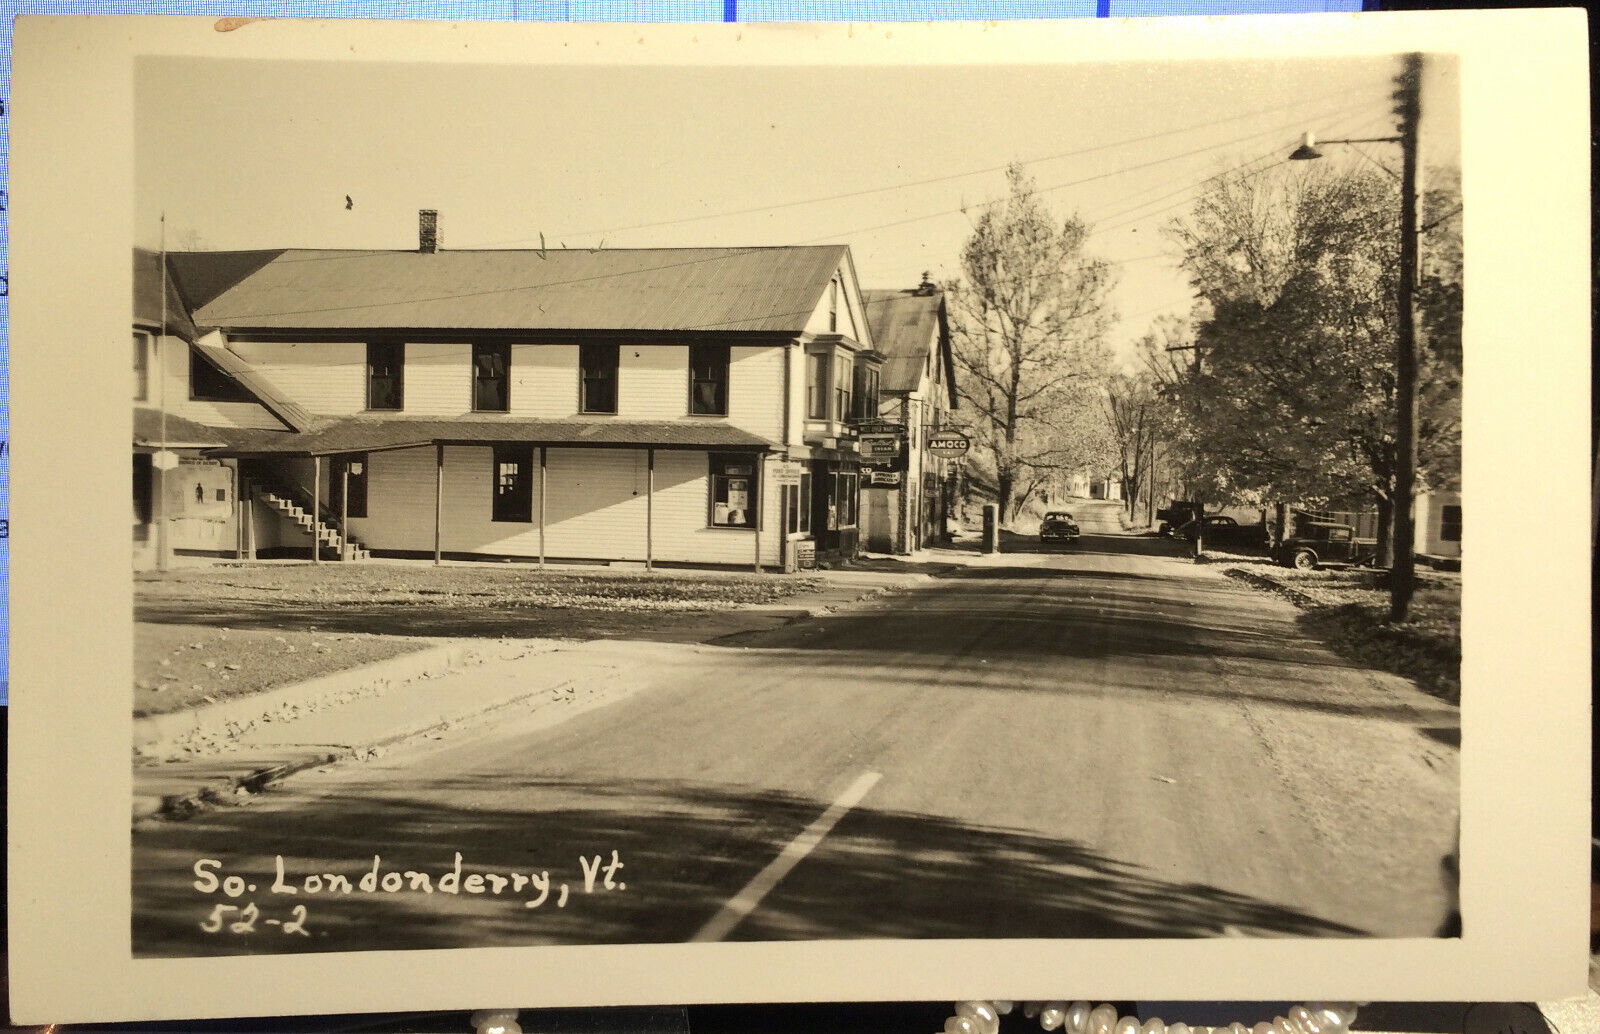 SO. LONDONDERRY, VERMONT Photo Post Card, Windham County, STREET SCENE